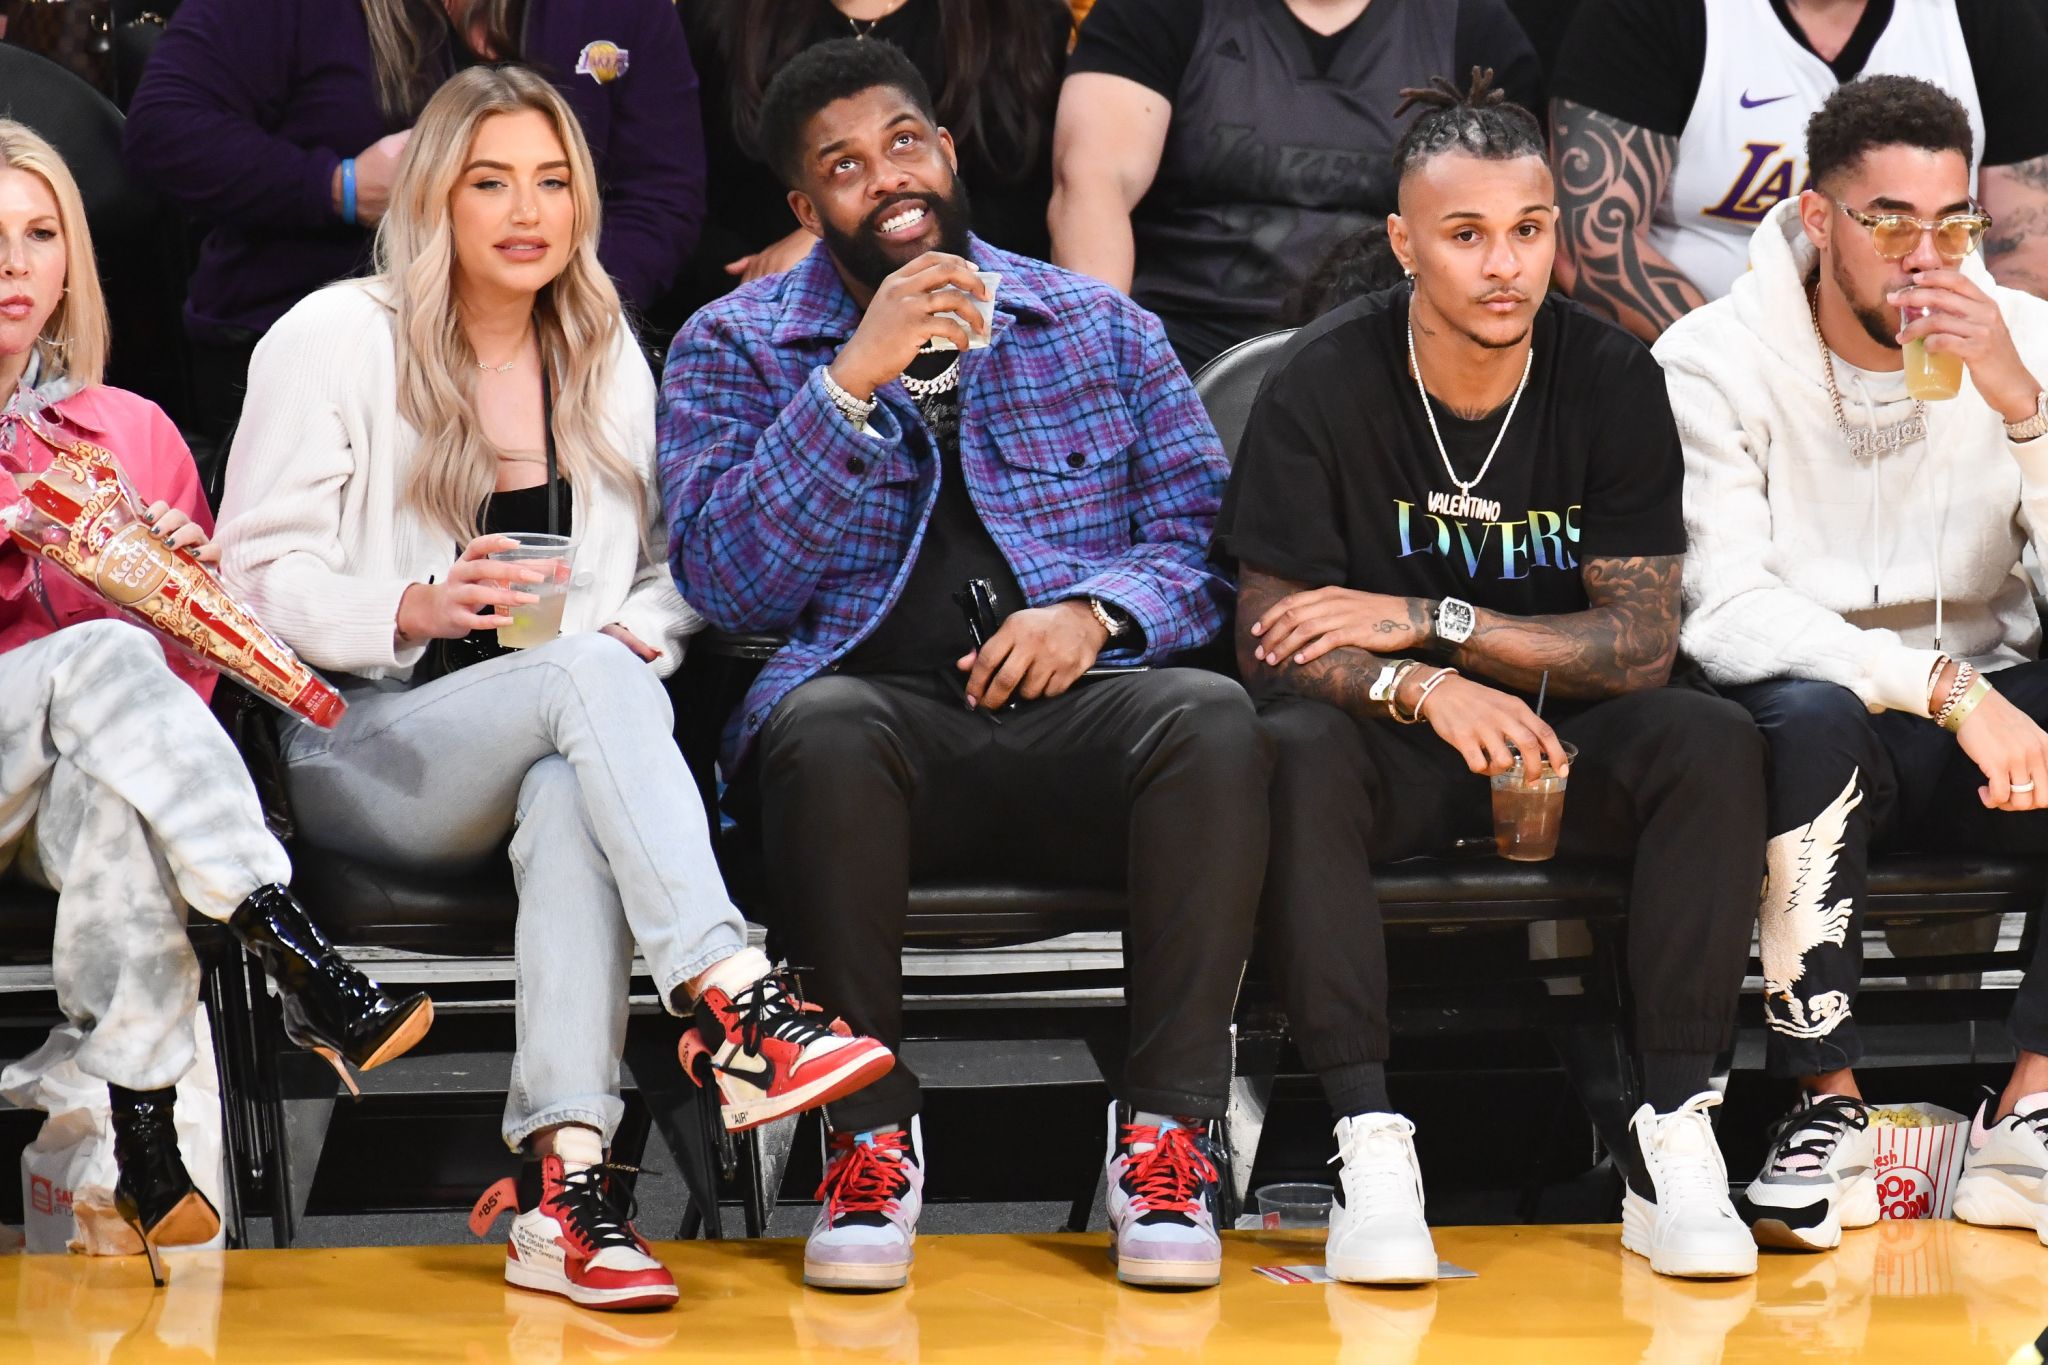 The celebrities who watched the Rockets run past the Lakers